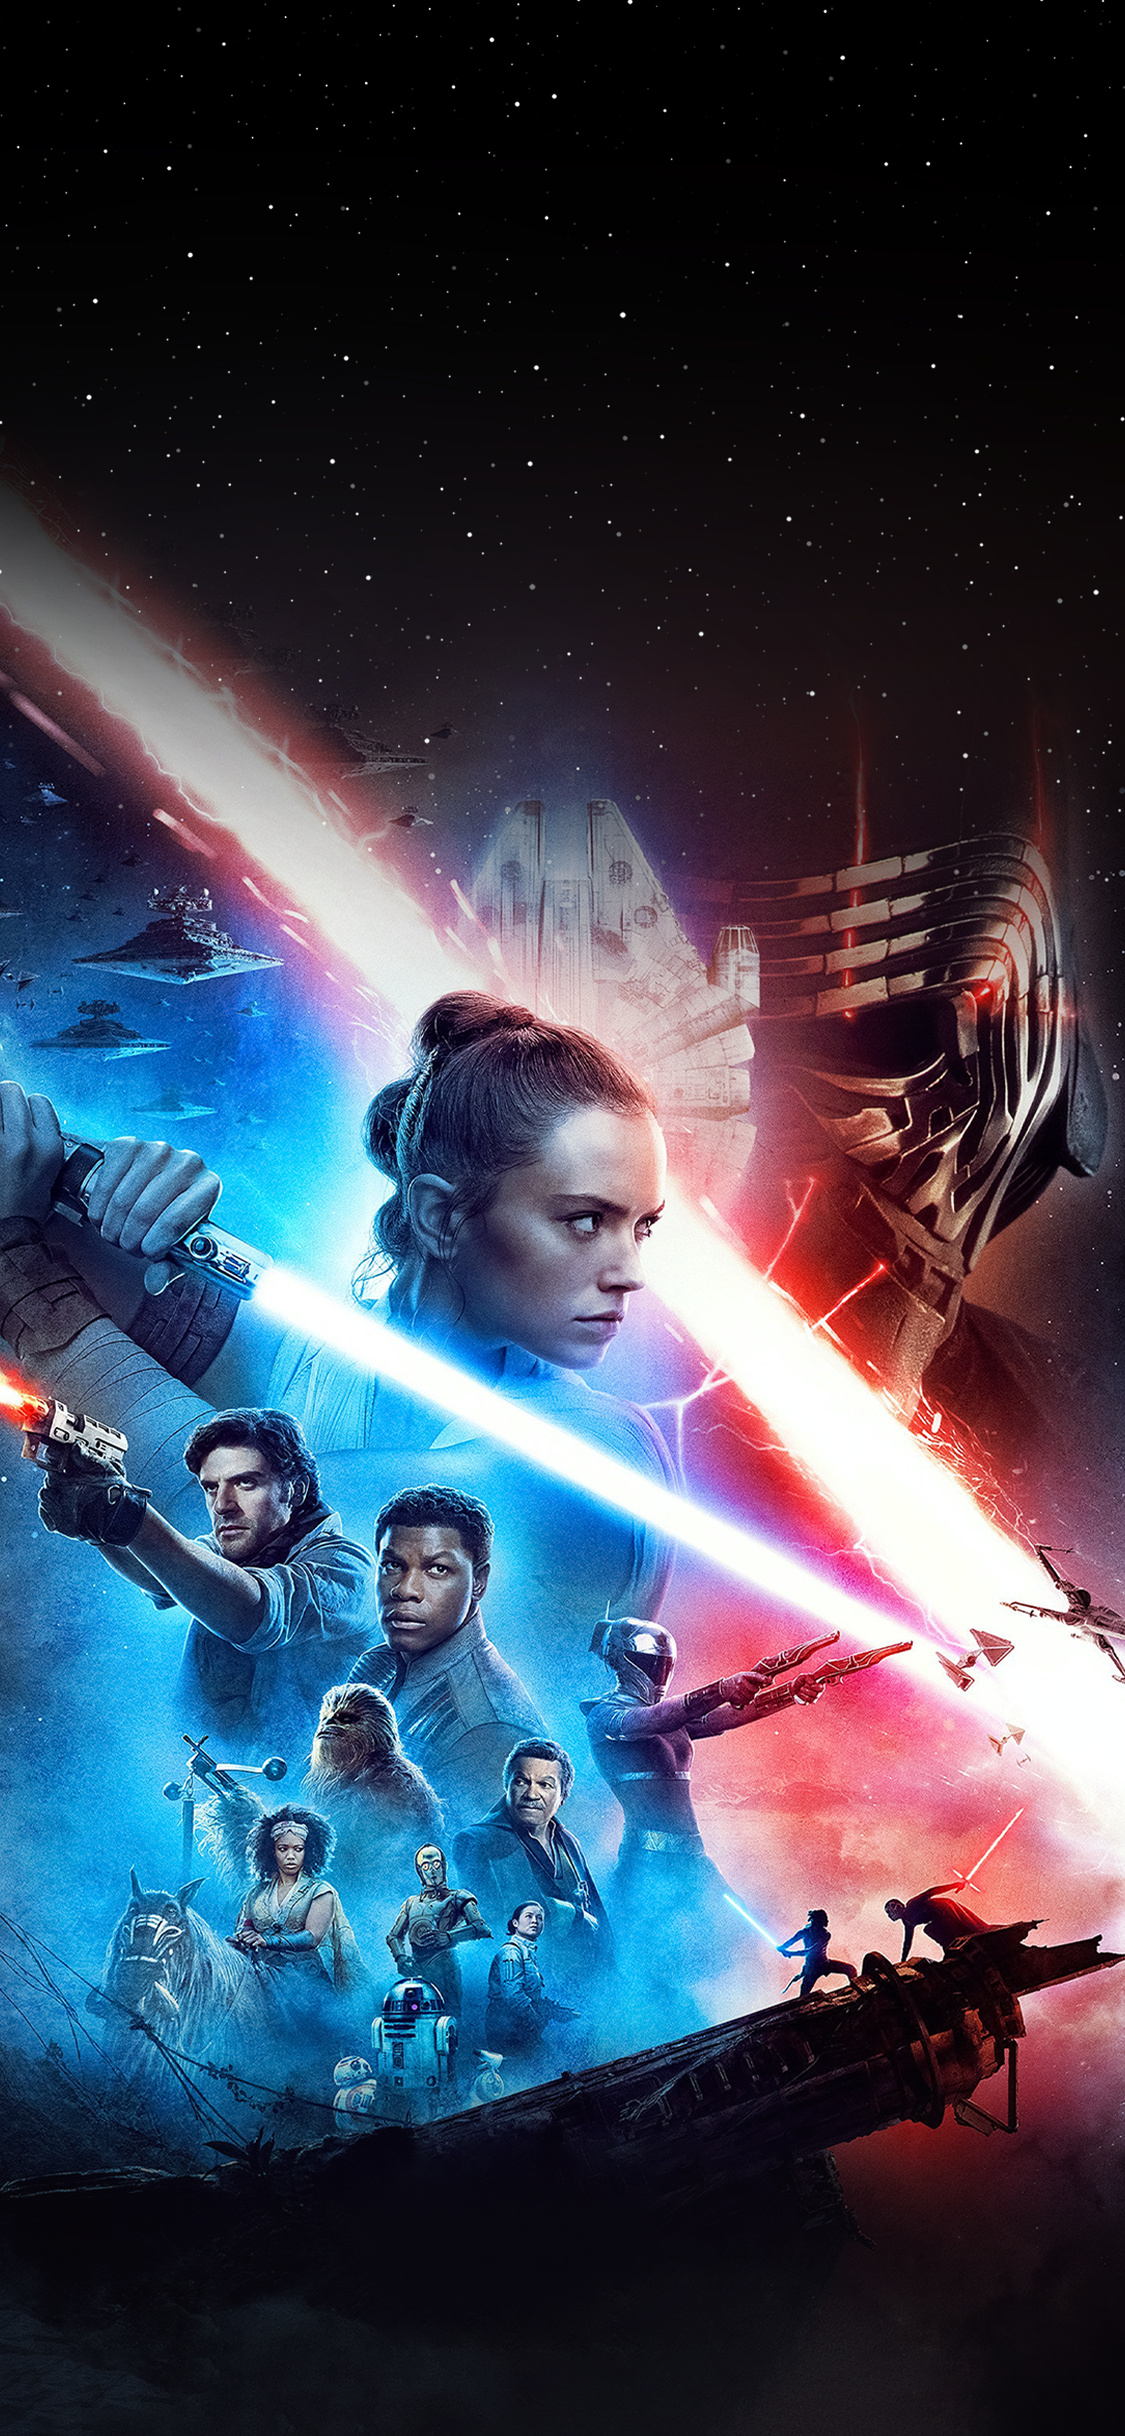 Star Wars: The Rise Of Skywalker: The main cast of the movie includes Daisy Ridley, Adam Driver, John Boyega, and Oscar Isaac. 1130x2440 HD Background.